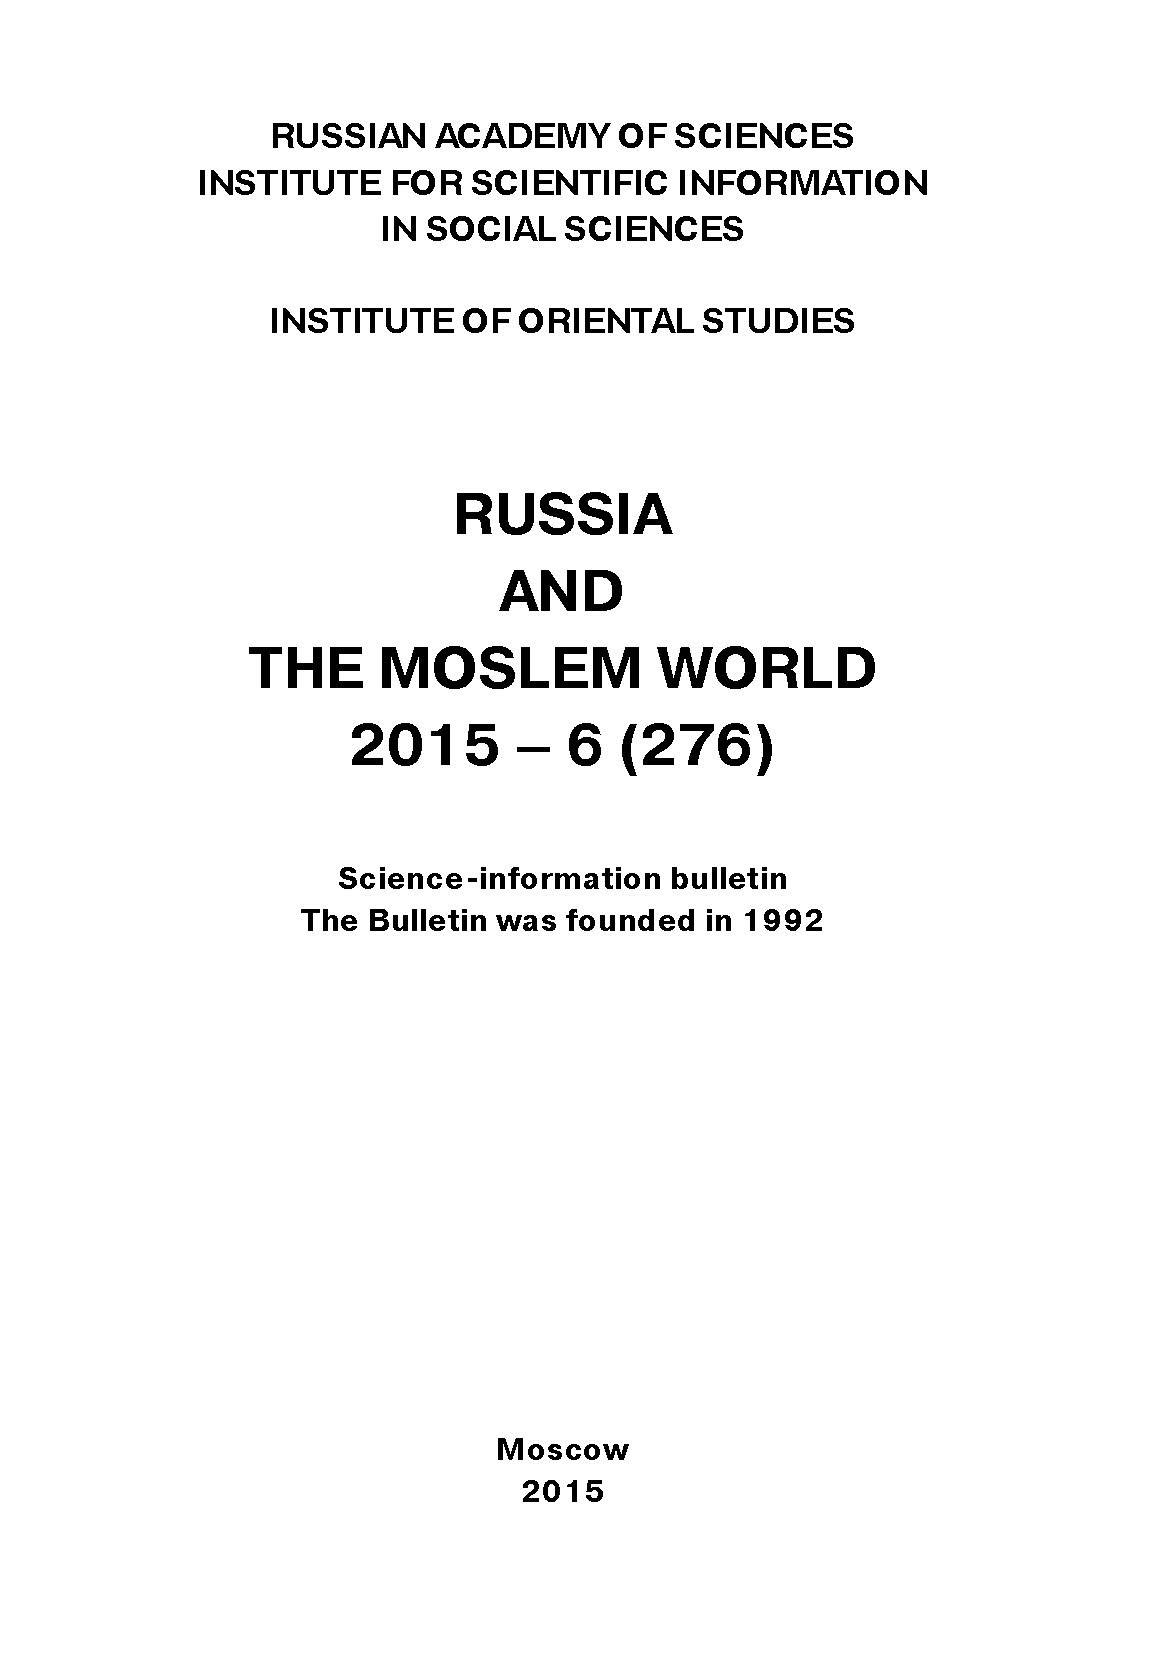 Russia and the Moslem World№ 06 / 2015